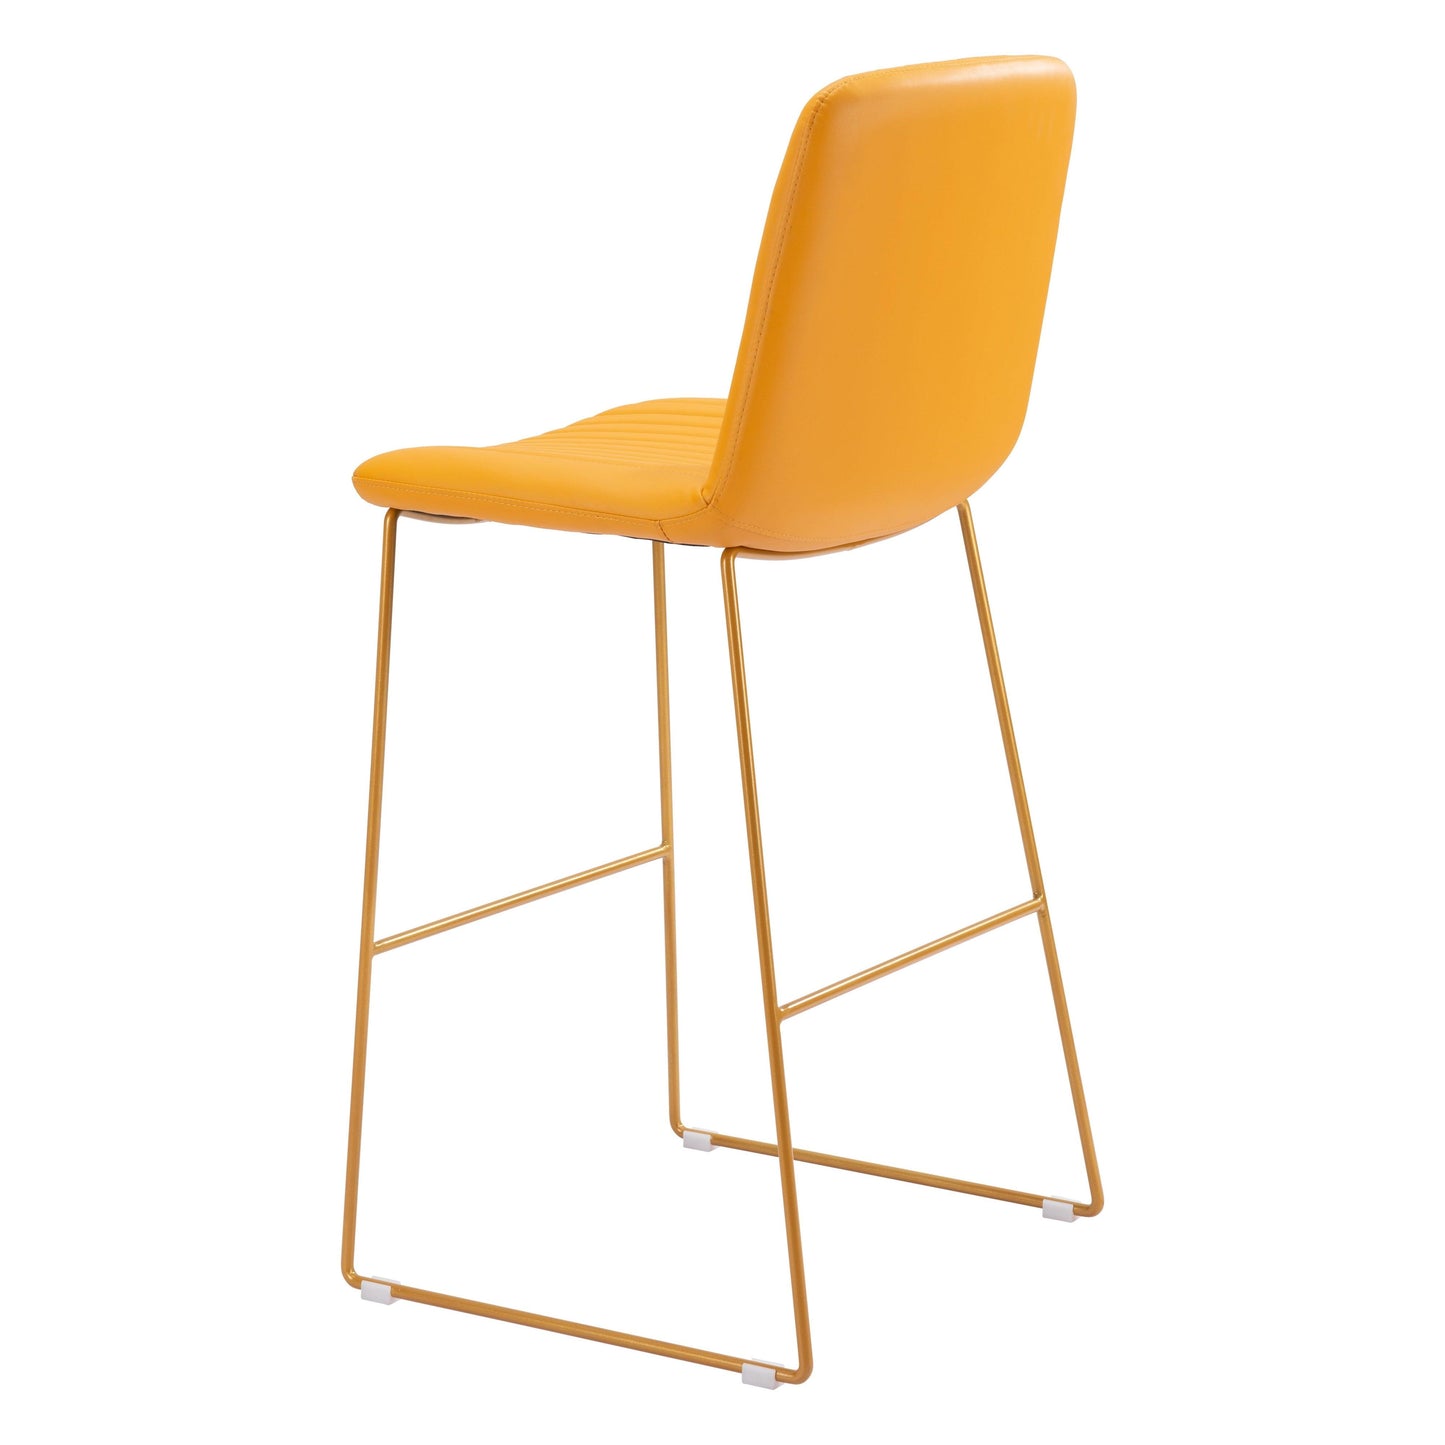 Mode Bar Chair (Set of 2) Yellow - Sideboards and Things Back Type_With Back, Brand_Zuo Modern, Color_Yellow, Depth_20-30, Finish_Powder Coated, Height_40-50, Materials_Metal, Materials_Upholstery, Metal Type_Steel, Number of Pieces_2PC Set, Product Type_Bar Height, Upholstery Type_Leather, Upholstery Type_Vegan Leather, Width_20-30